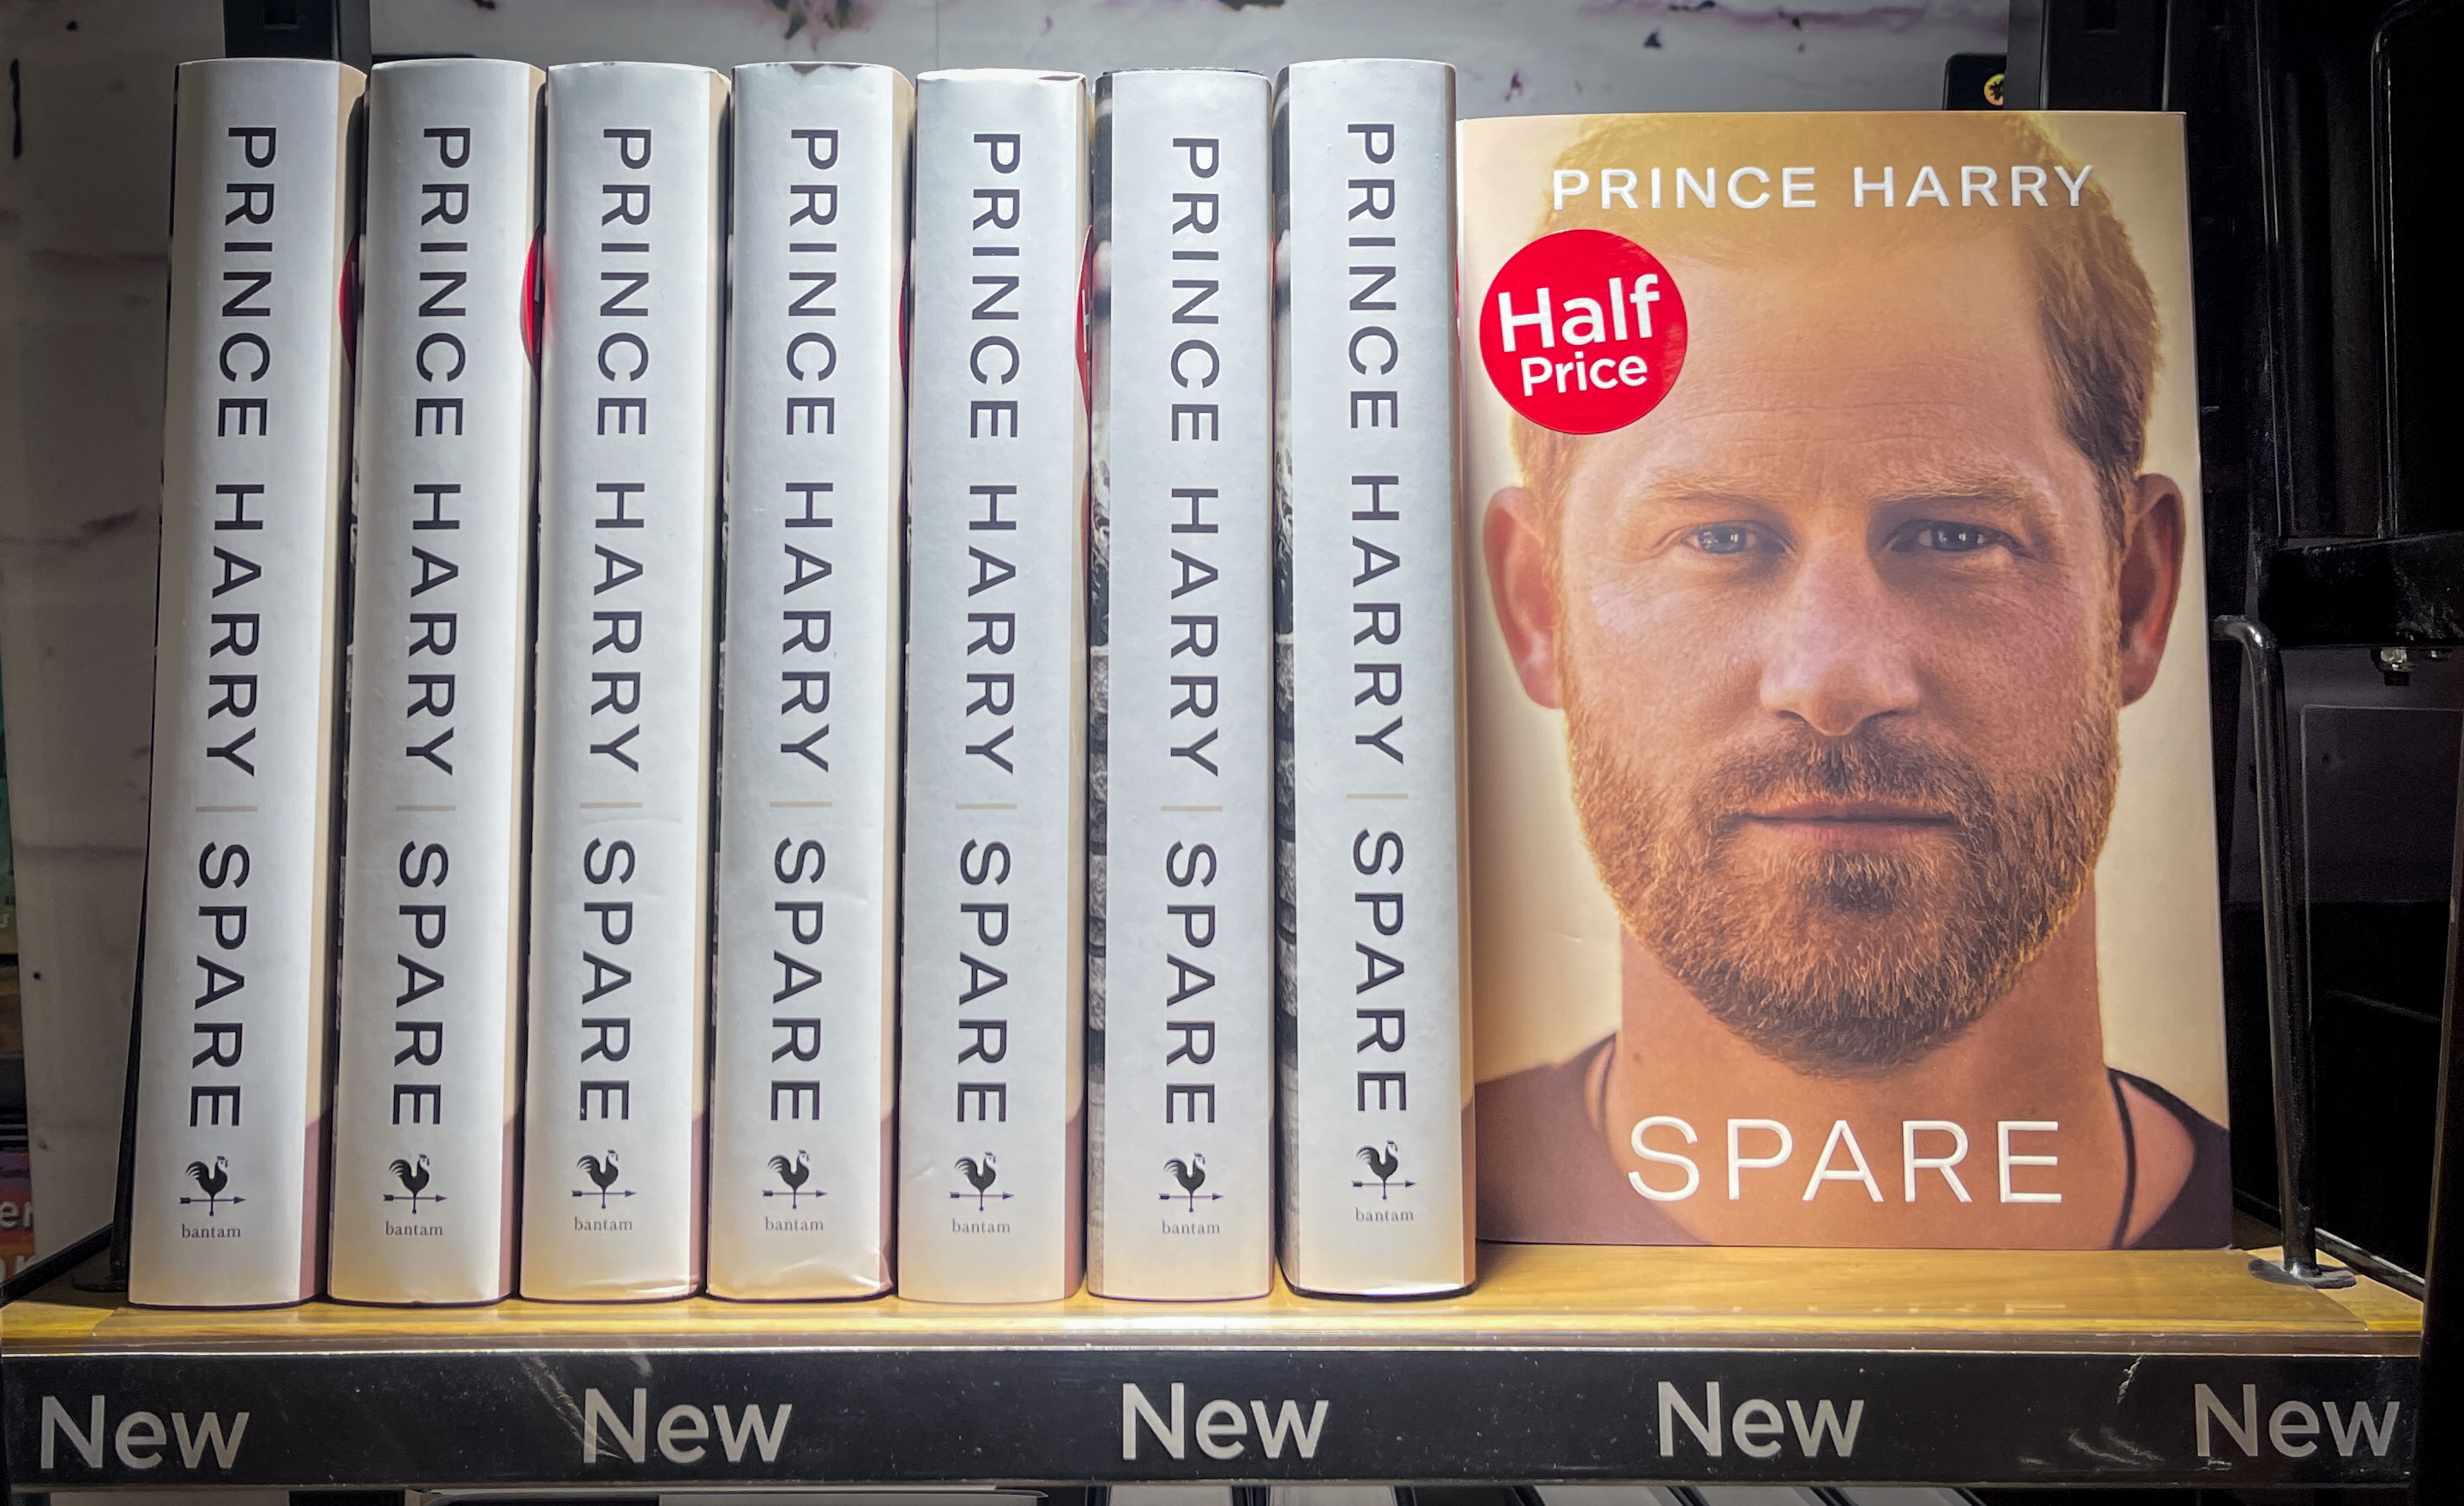 Copies of "Spare" at a bookstore in Bath, England on January 11, 2023 | Source: Getty Images